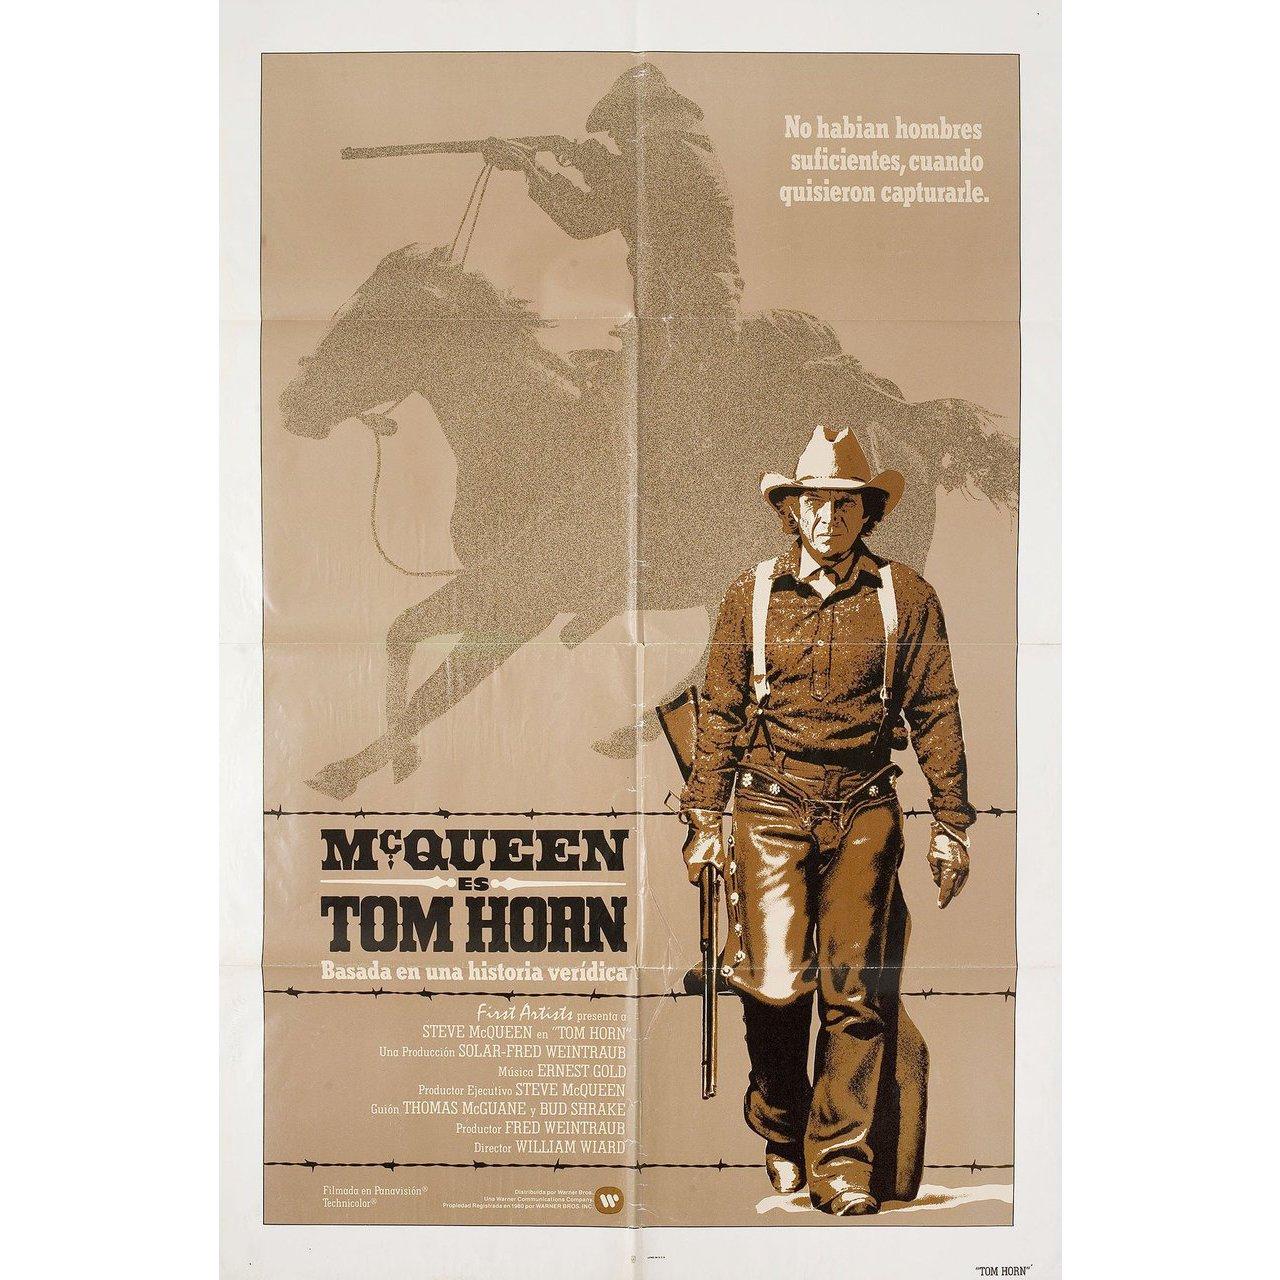 Original 1980 U.S. one sheet poster for the film Tom Horn directed by William Wiard with Steve McQueen / Linda Evans / Richard Farnsworth / Billy Green Bush. Very good condition, folded. Many original posters were issued folded or were subsequently